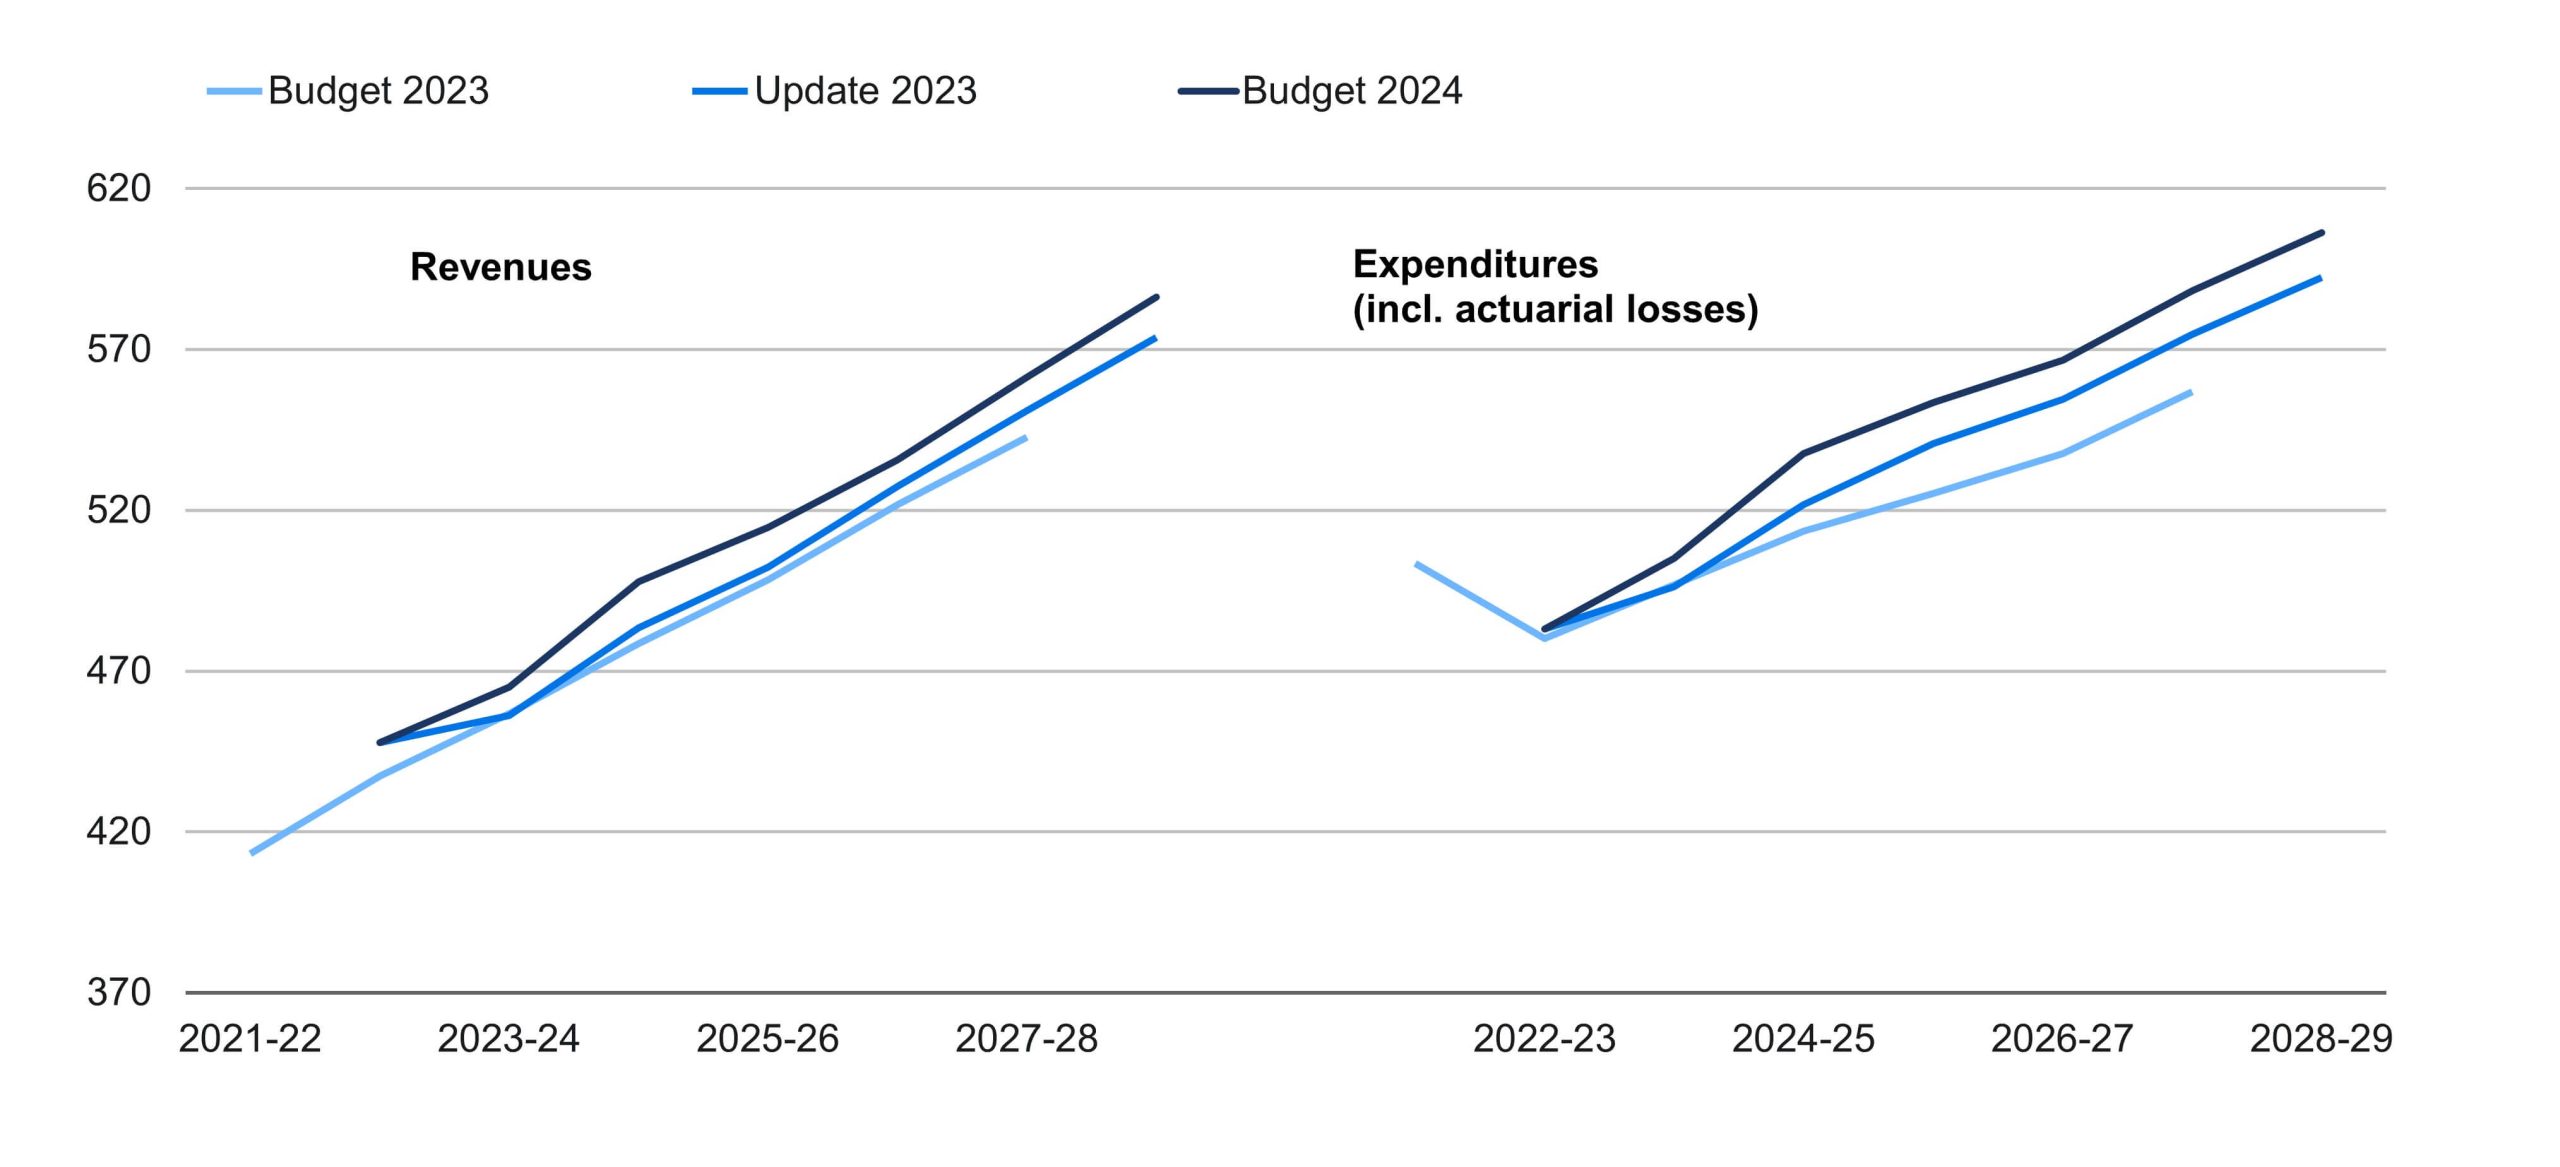 Line chart showing the medium-term revenue and expenditure projections from the 2024 Federal Budget along with the previous projections from 2023.